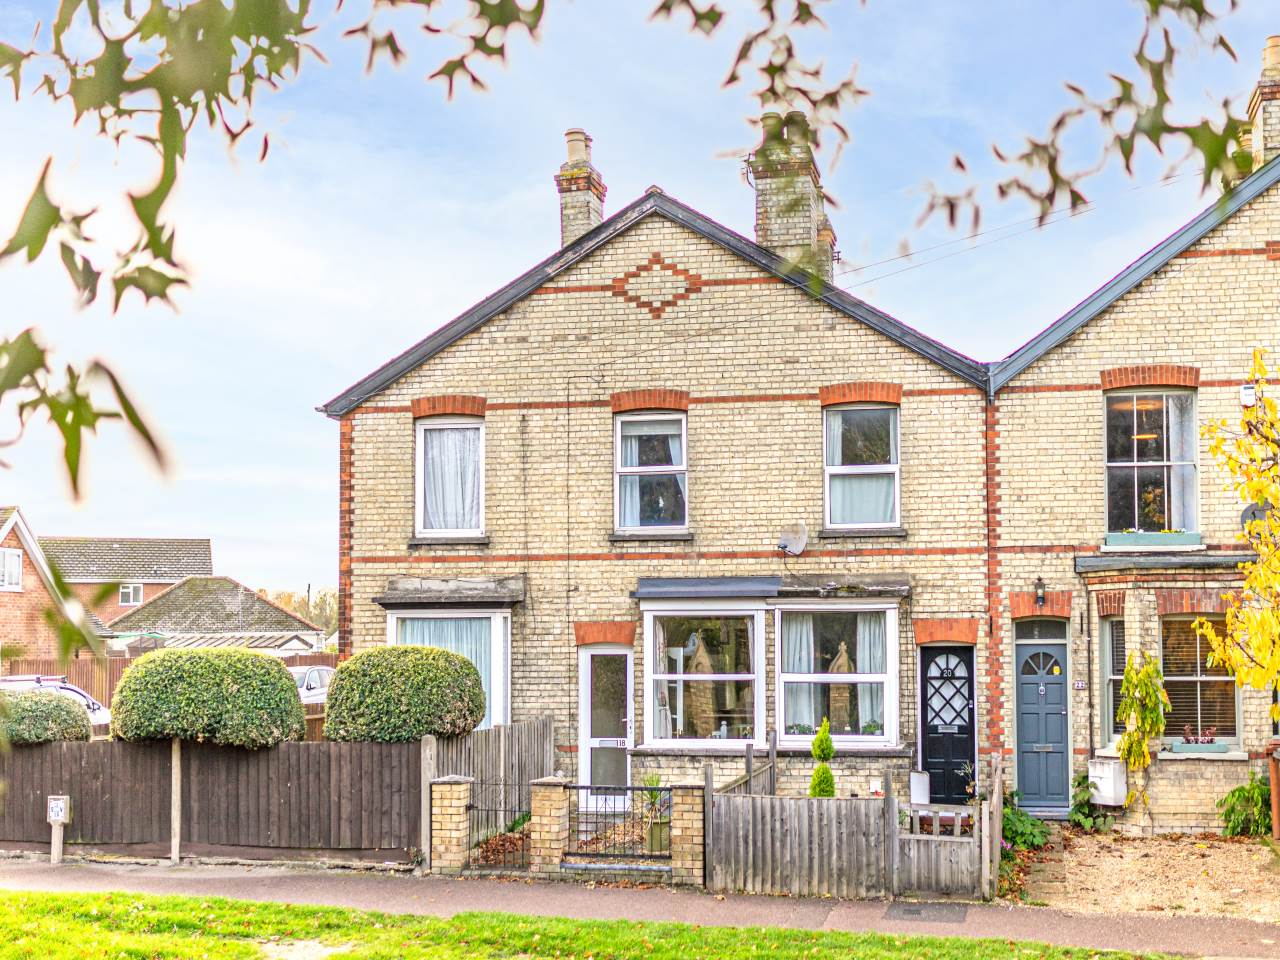 2 bed terraced house for sale in Melbourn Road, Royston - Property Image 1